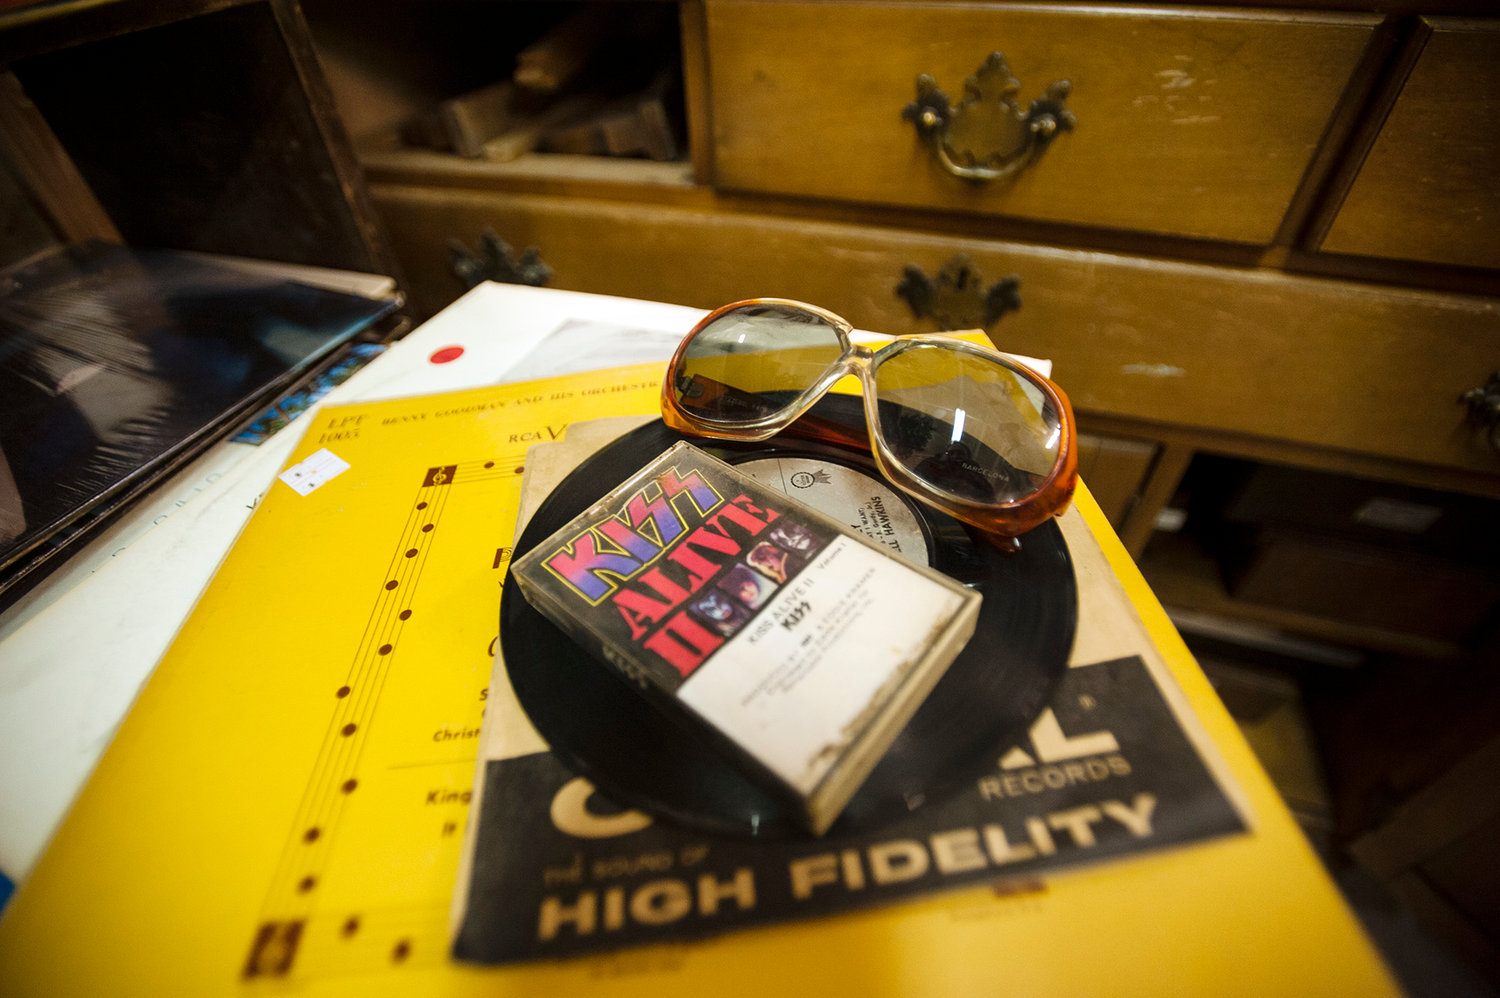 Sunglasses, a KISS cassette tape, and a couple records sit on a table at Cowlitz River Antiques on Monday, March 3, 2014 at Yard Birds in Chehalis. The items were picked out by Mat Griesse, Chehalis, who spent time looking through an amalgam of collectibles at the store on Monday.